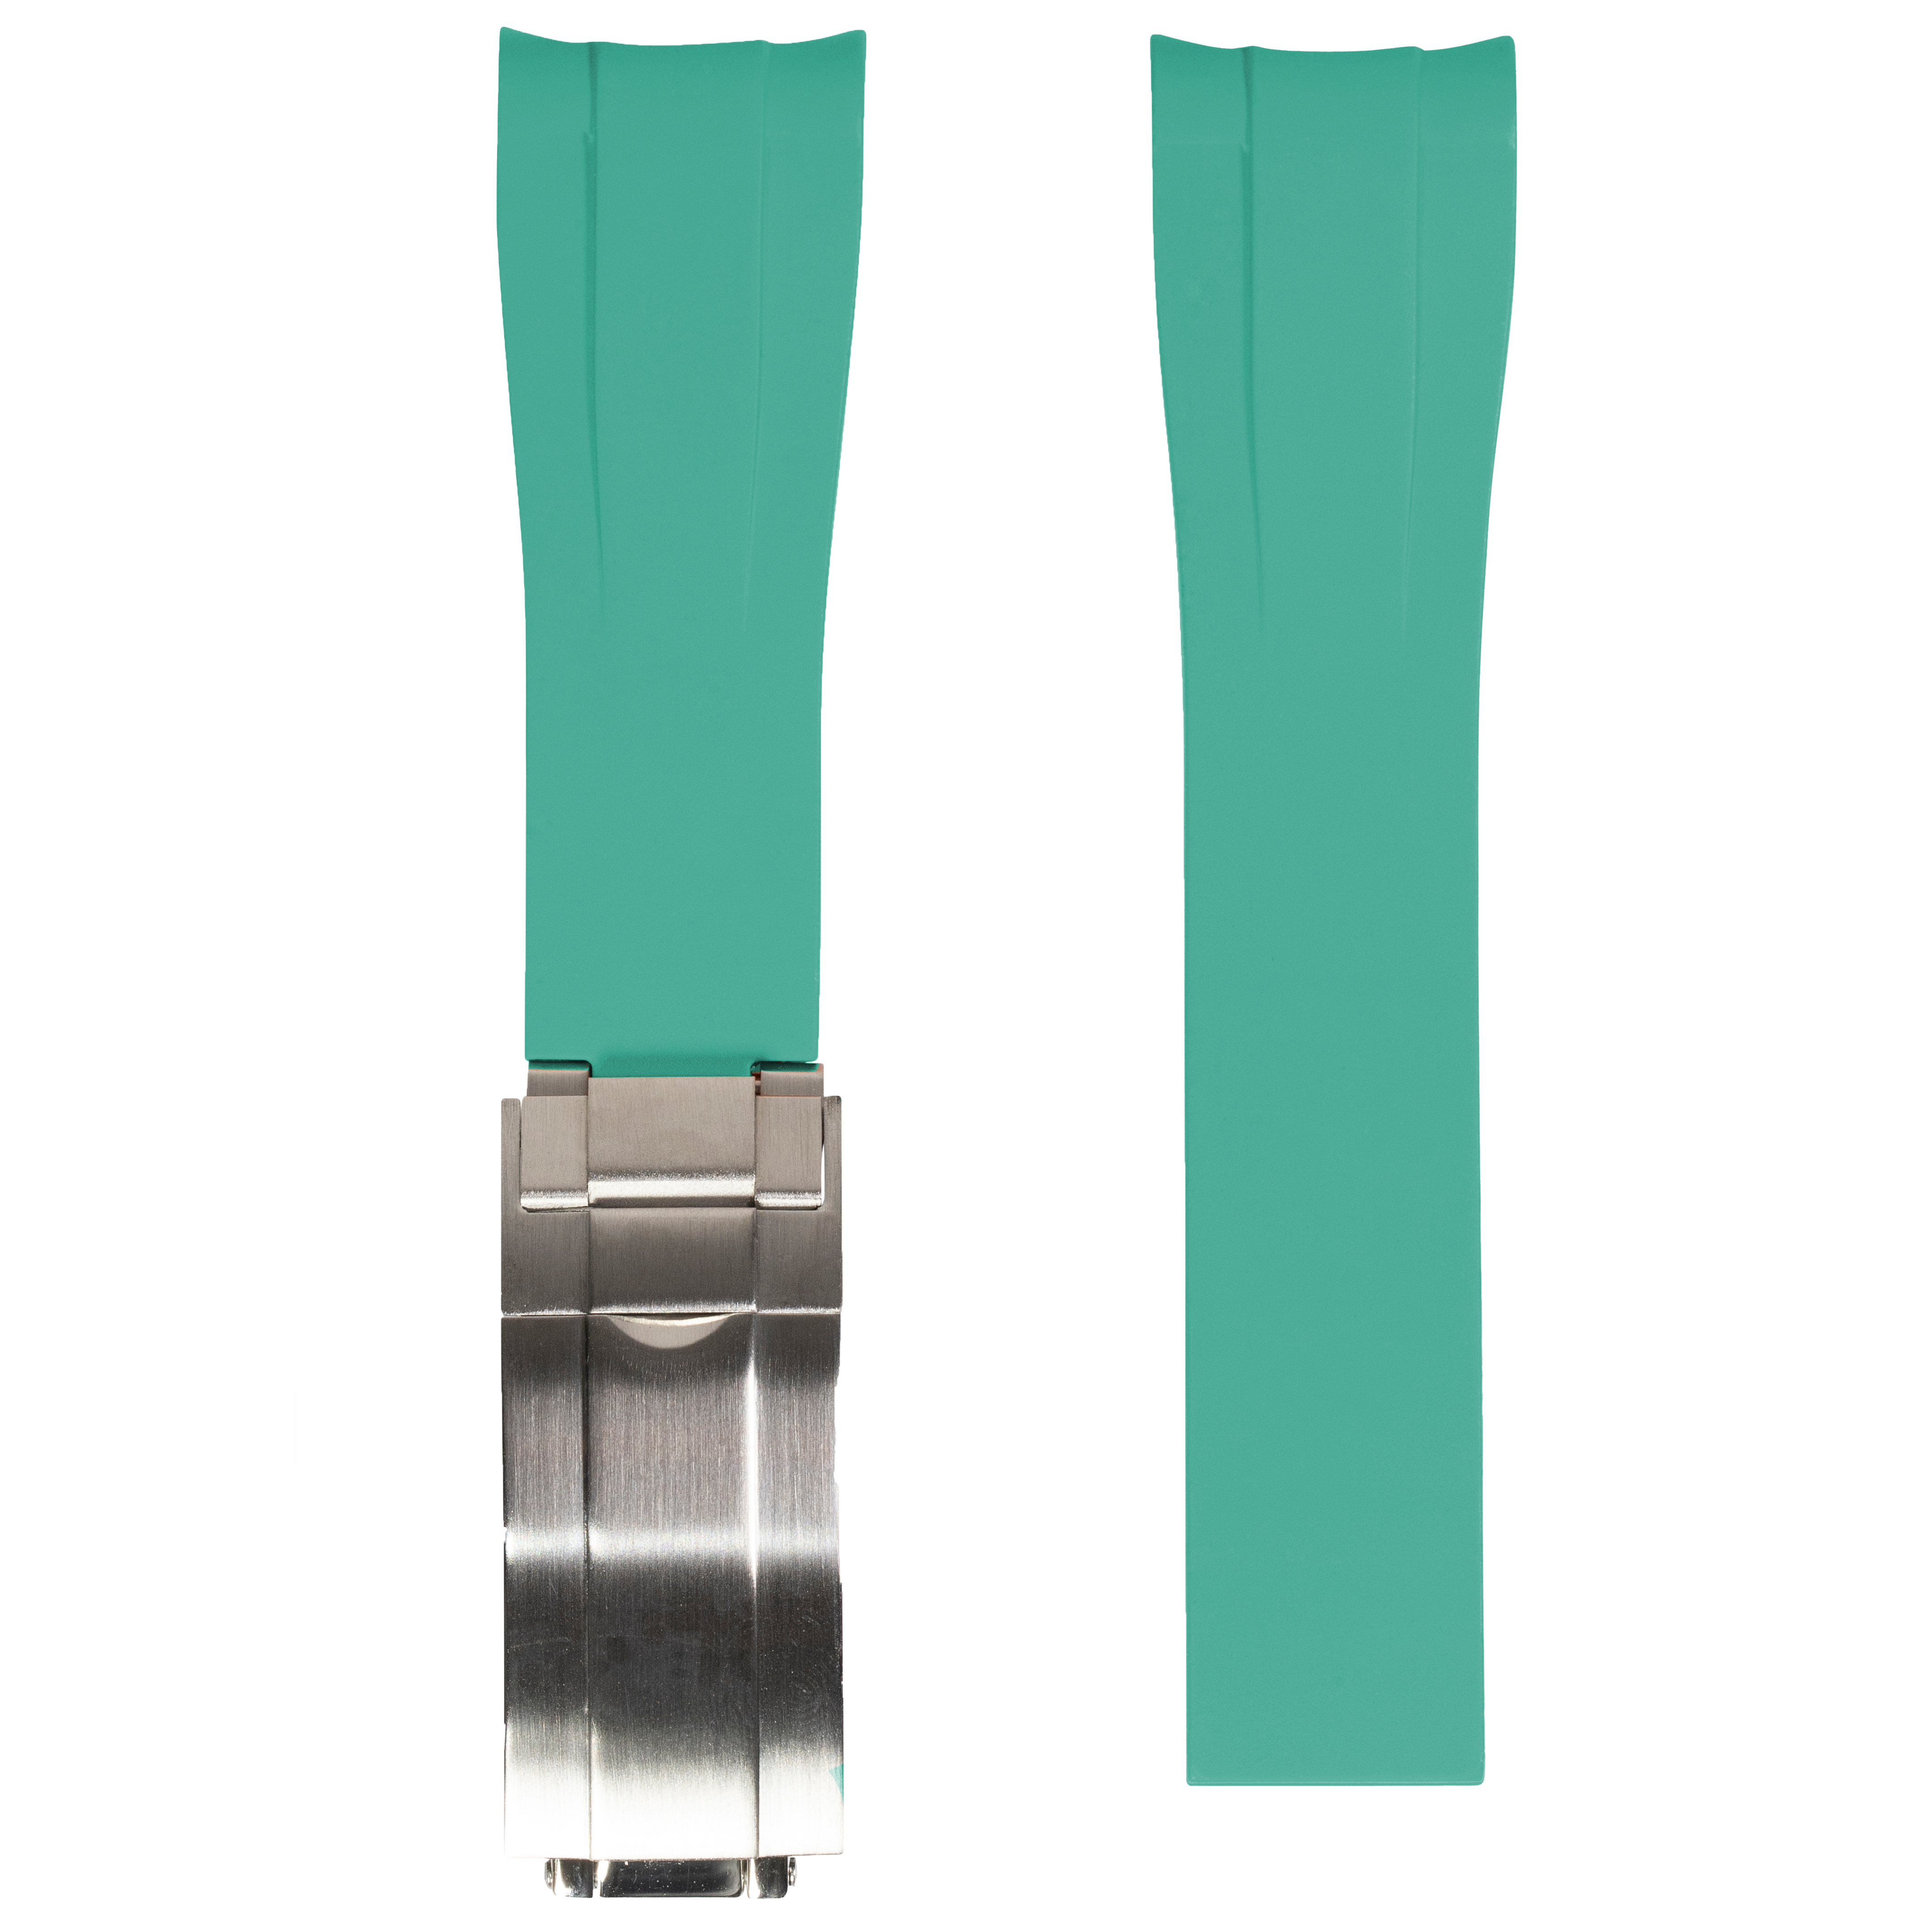 [Rolex Only] Vulcanised Rubber with Oyster Clasp  - Tiffany Blue